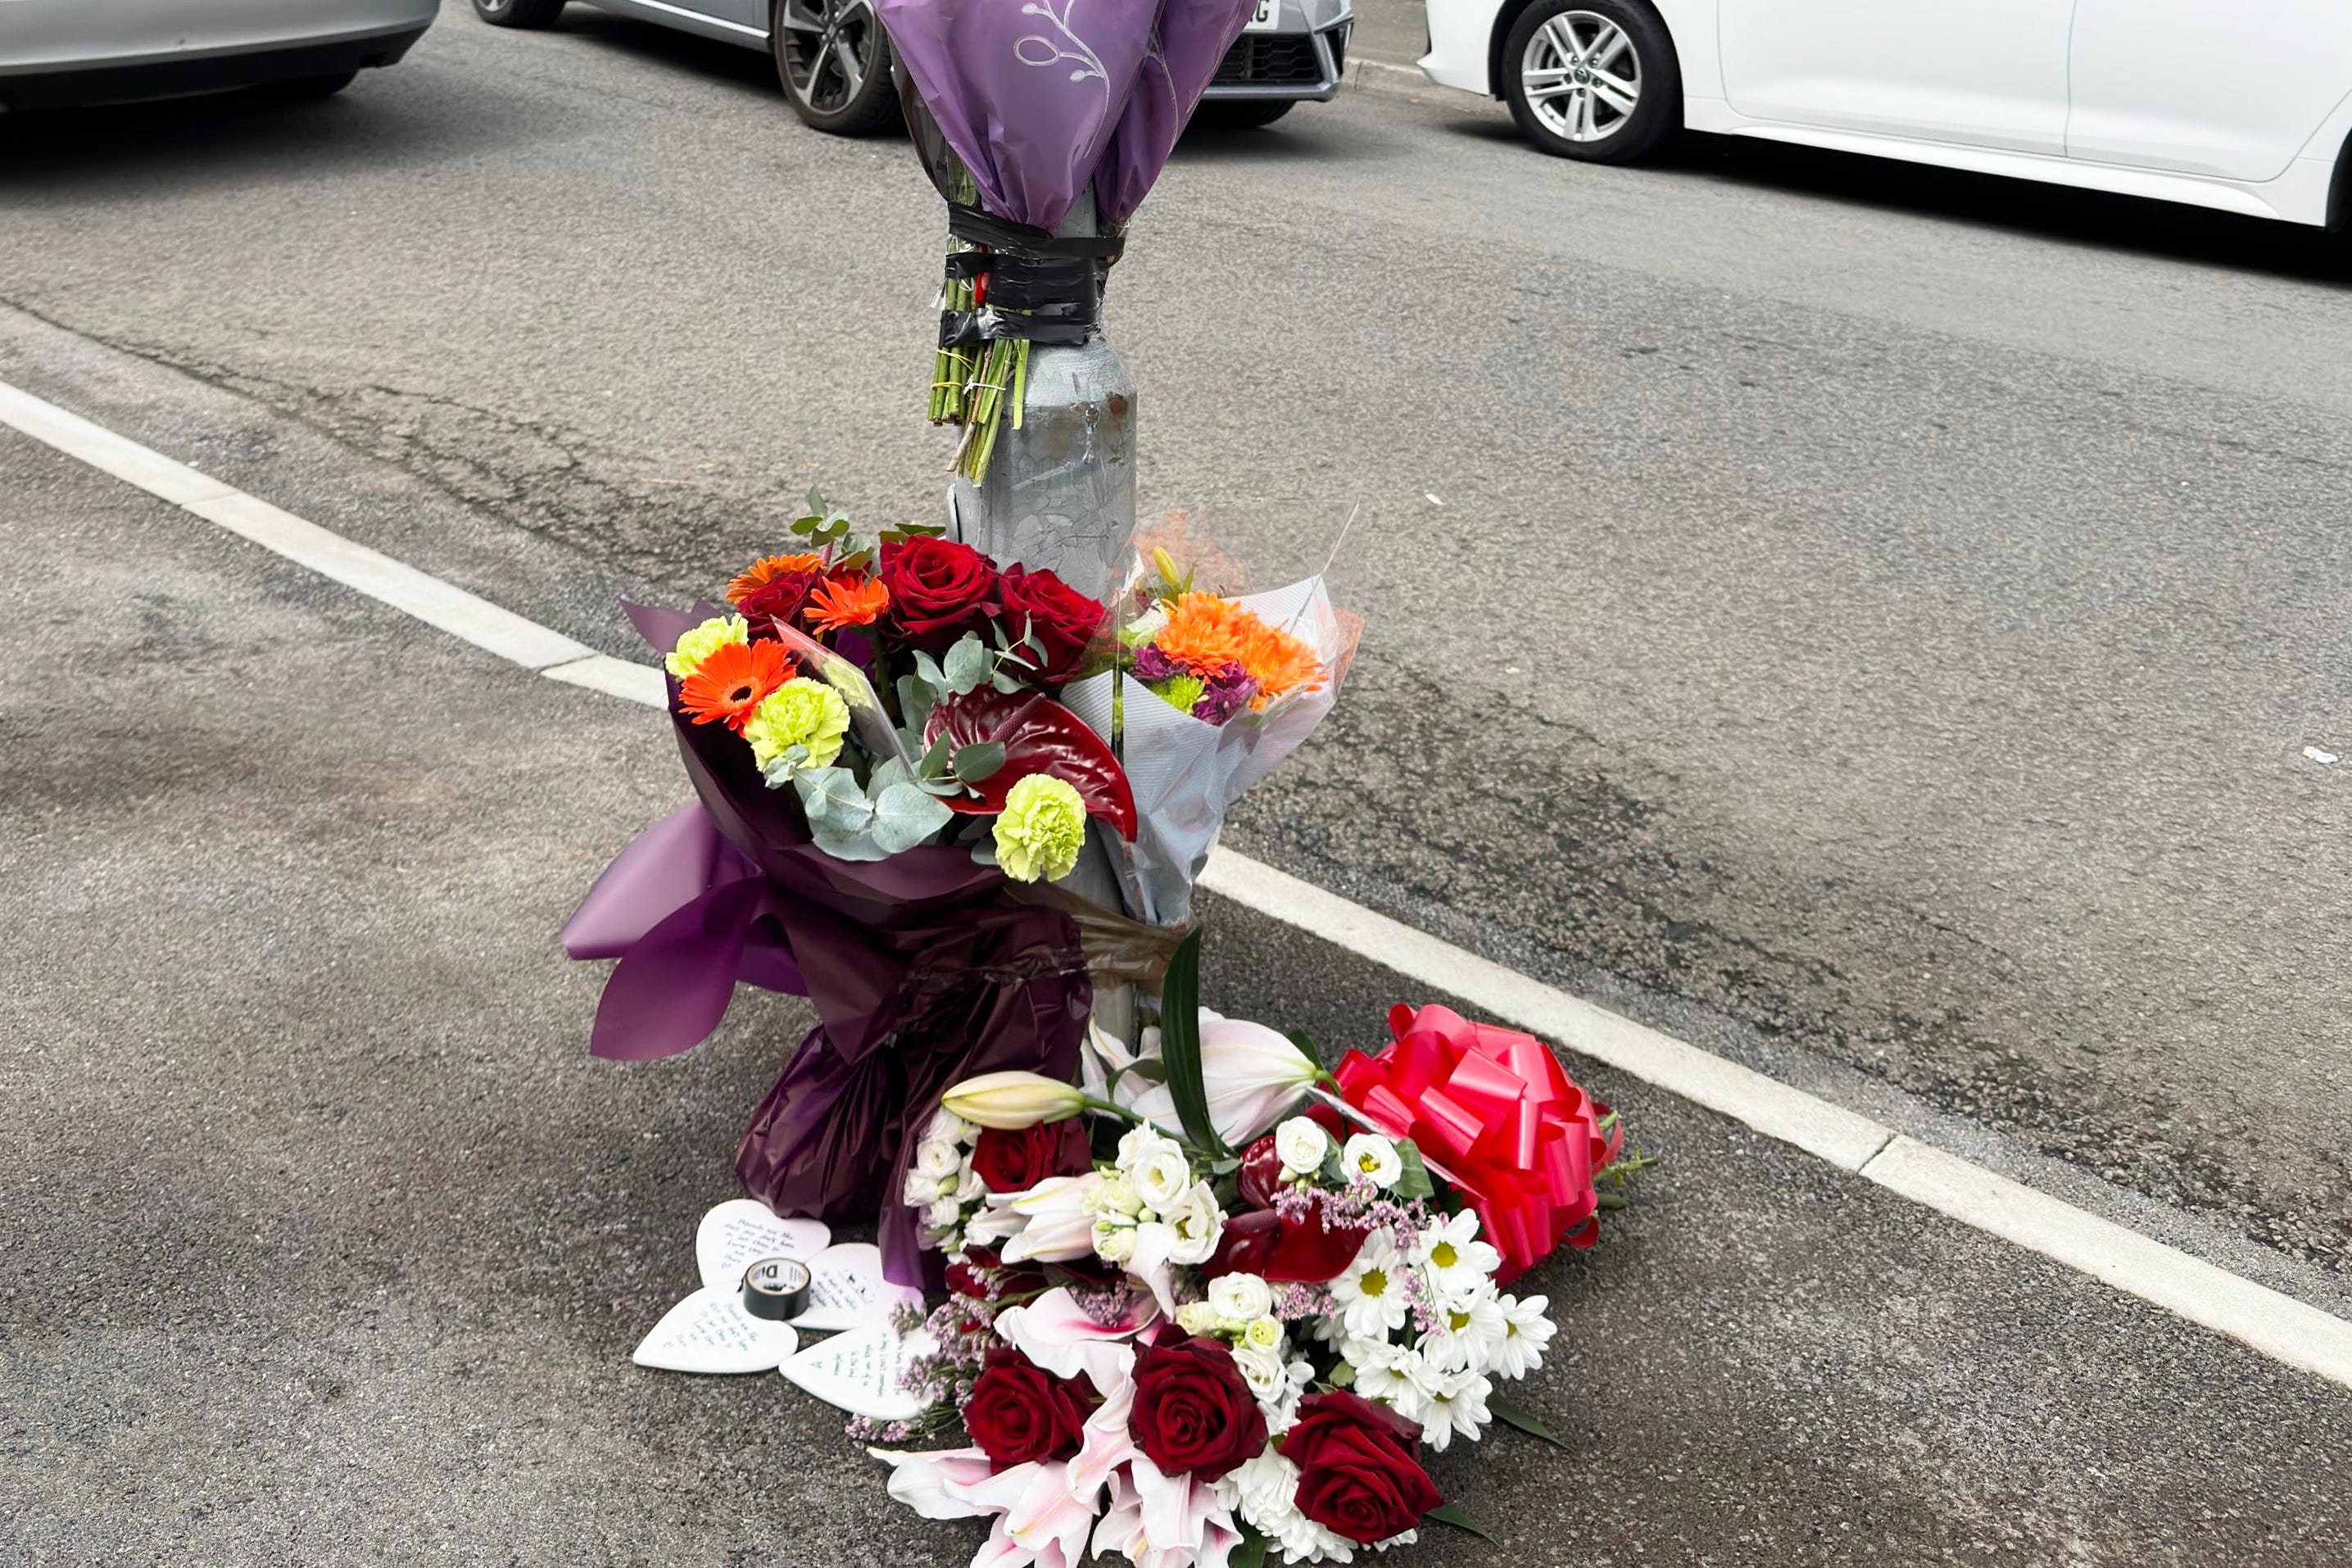 Flowers and tributes left for the two teenagers in Ely, Cardiff, whose deaths in a crash sparked a riot (PA)